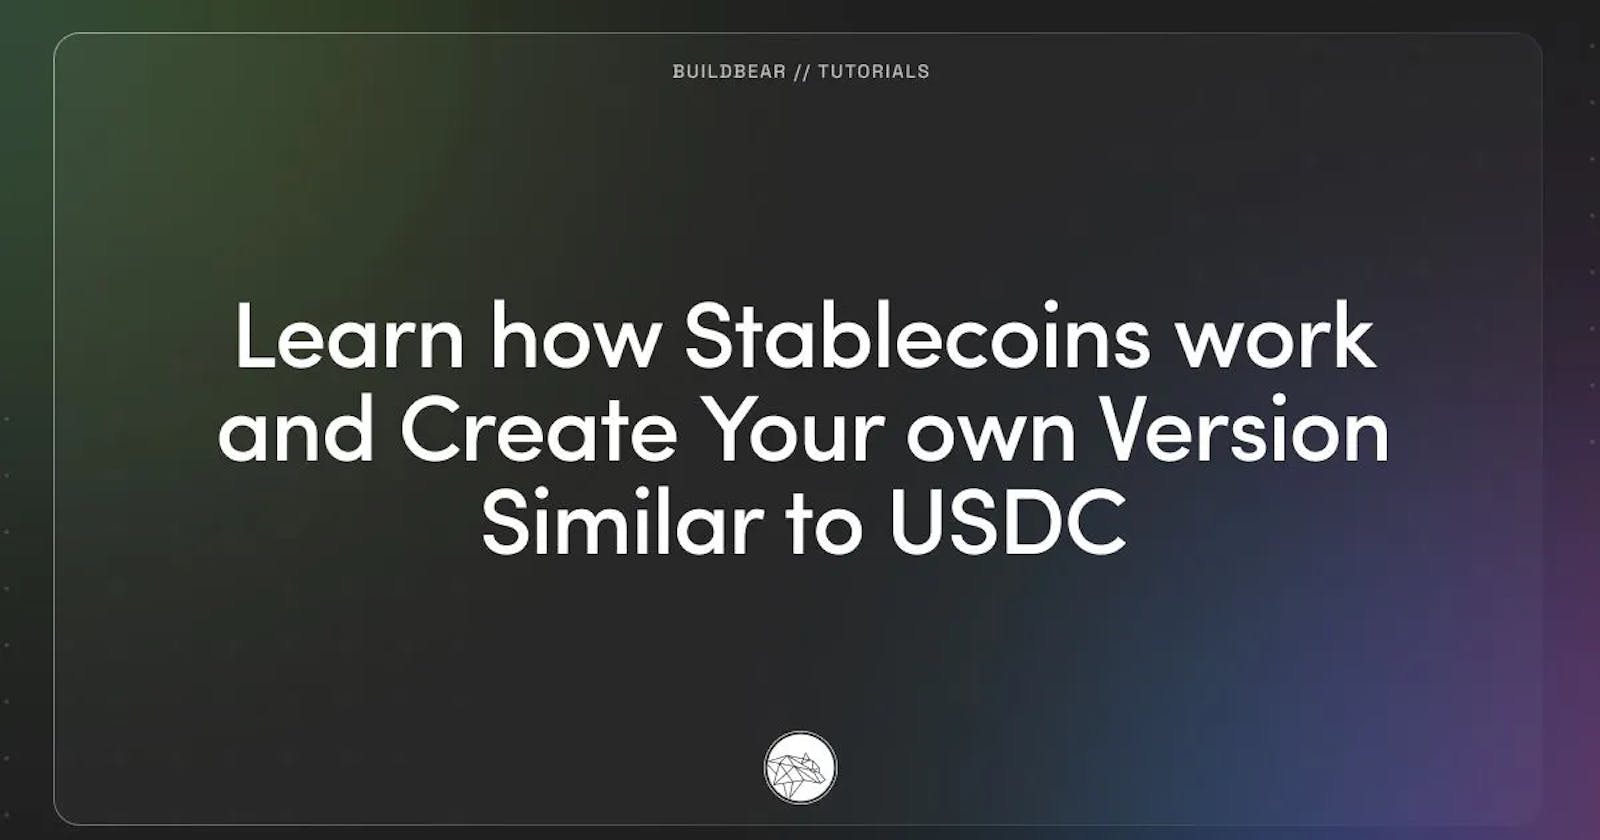 Learn how Stablecoins work and Create Your own Version Similar to USDC